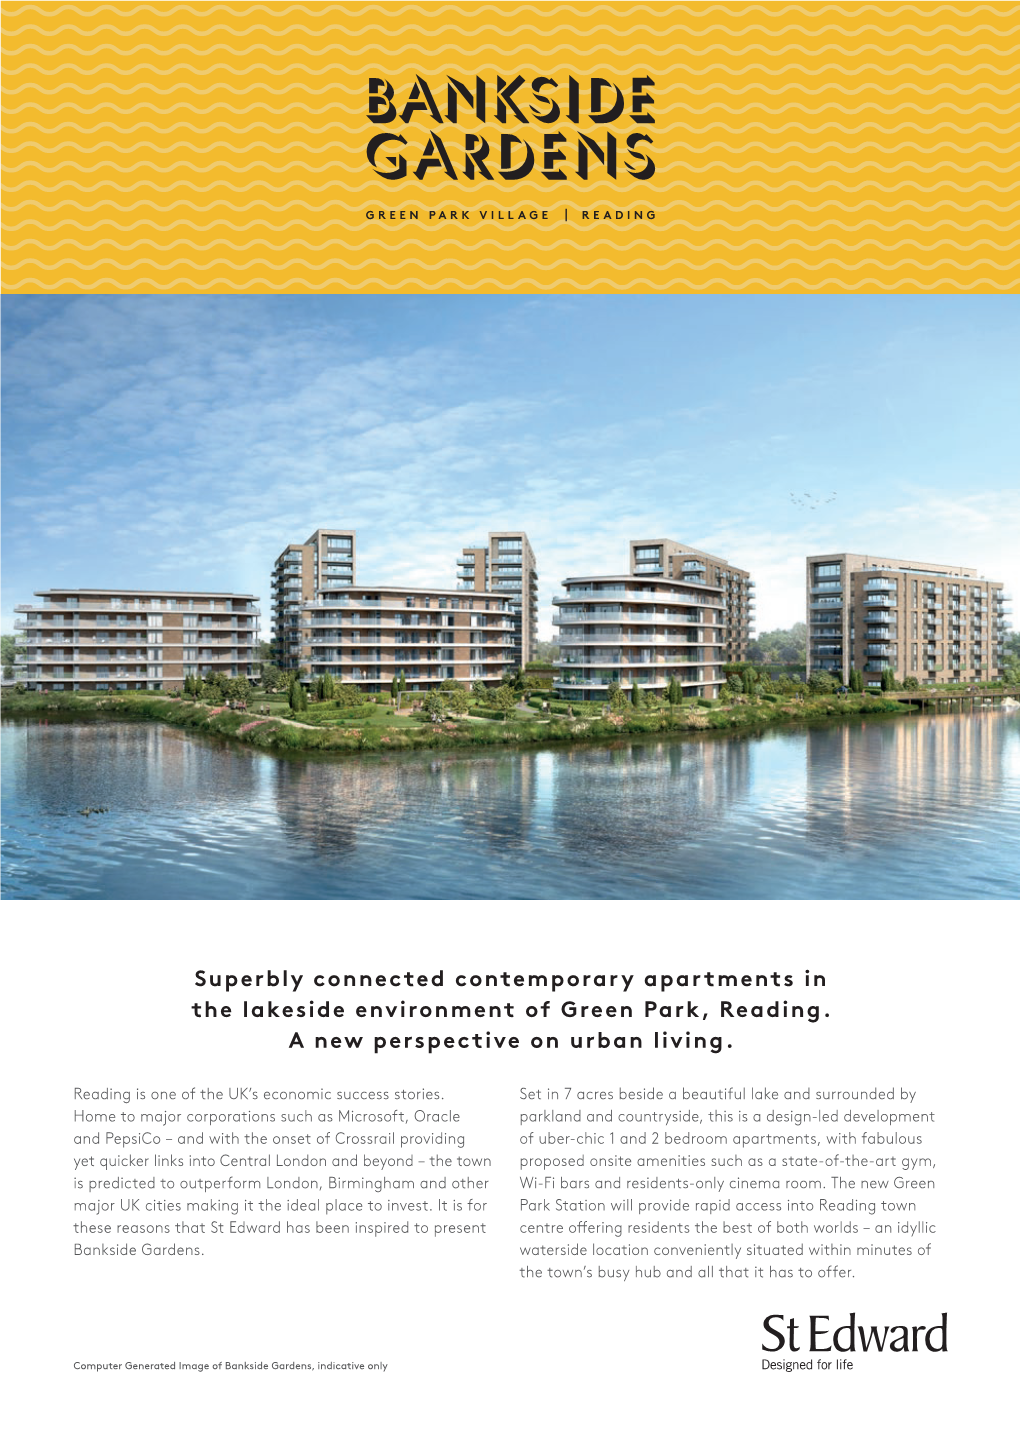 Superbly Connected Contemporary Apartments in the Lakeside Environment of Green Park, Reading